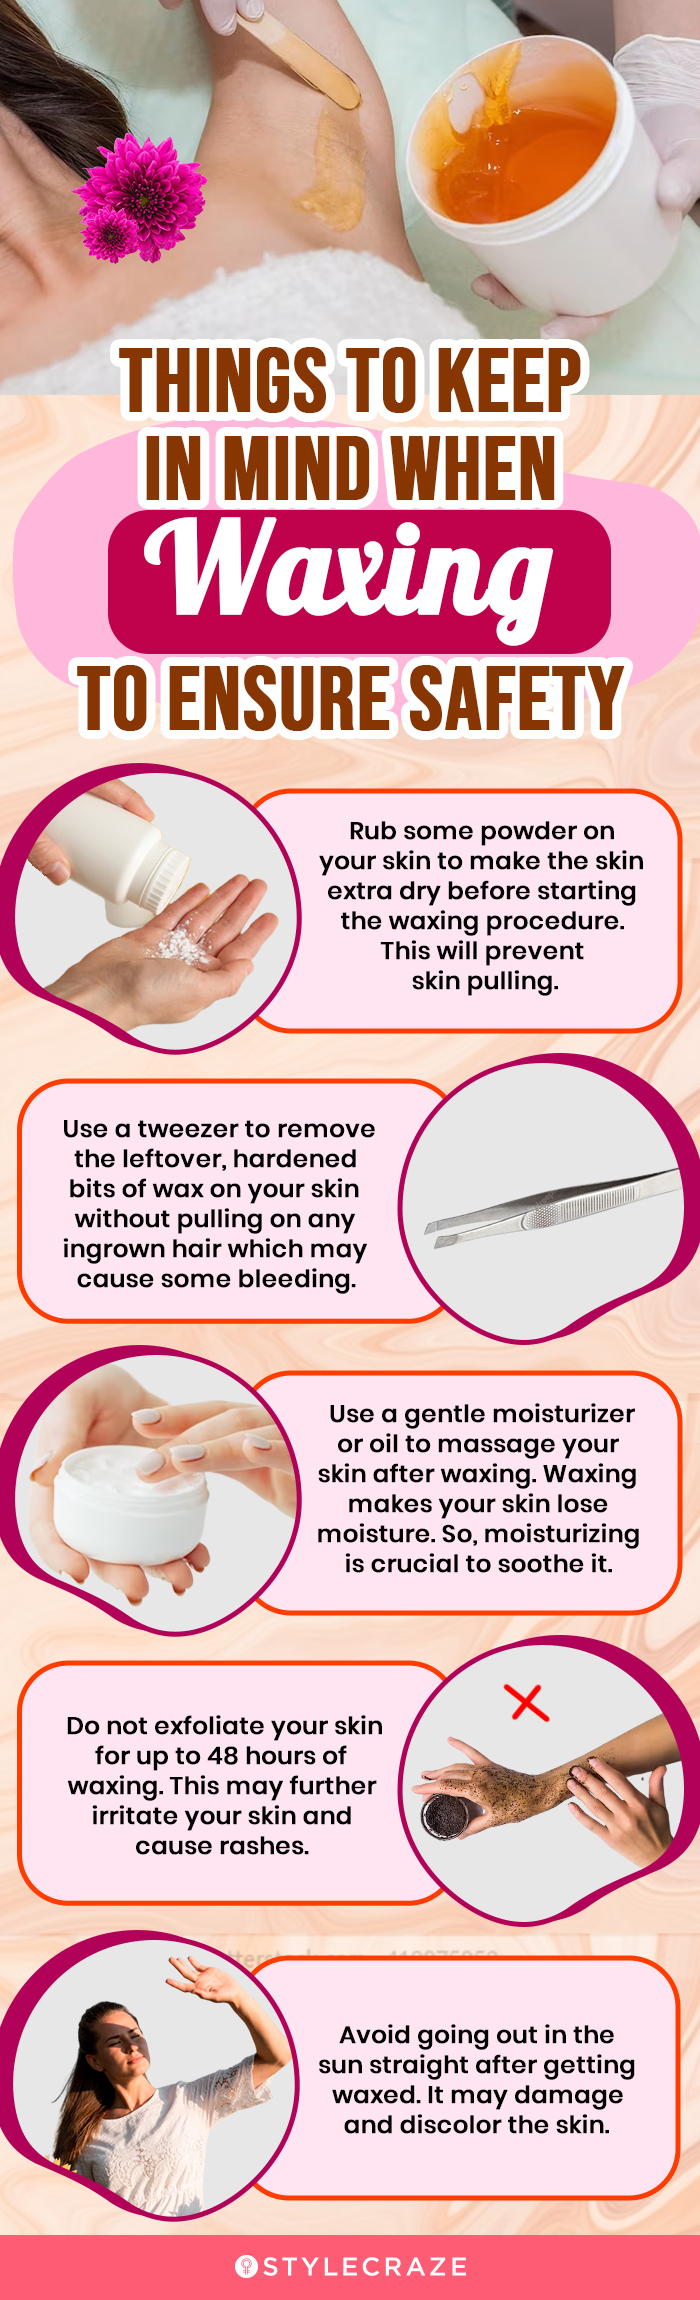 Things To Keep In Mind When Waxing To Ensure Safety(infographic)